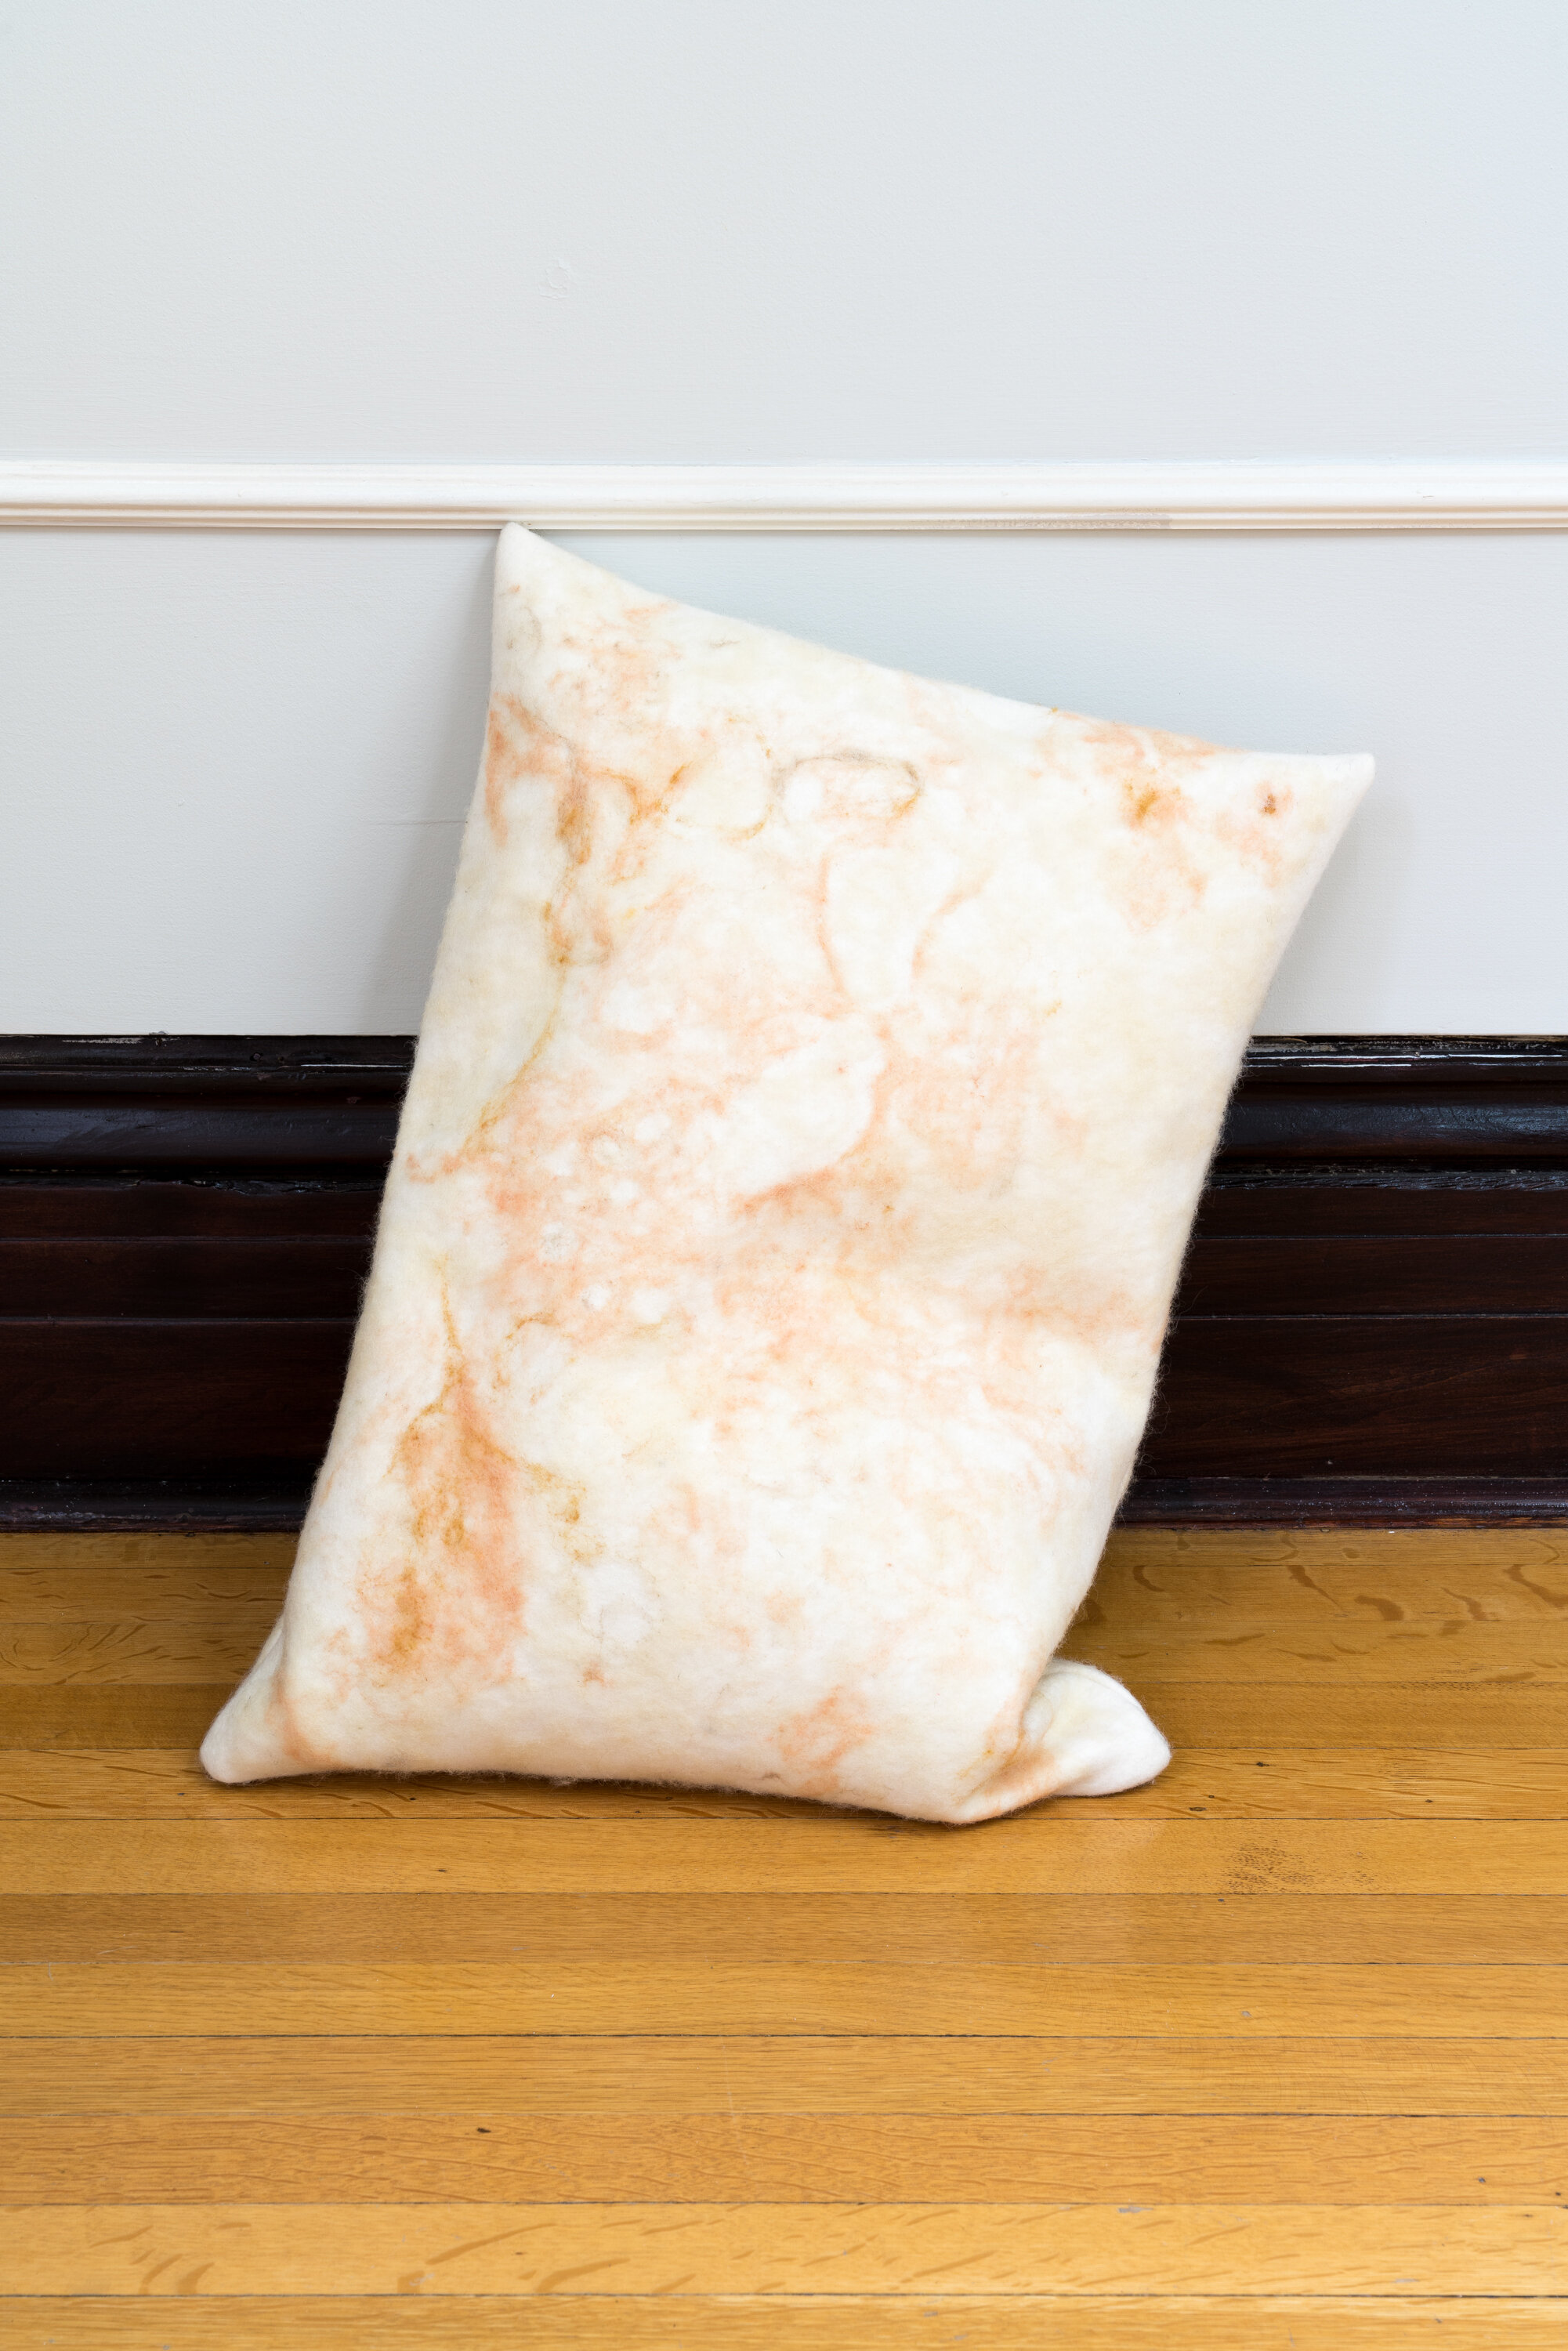 ProjetPangee_ASMA_Haunted pillow(2021)_26x18x6inches.jpg